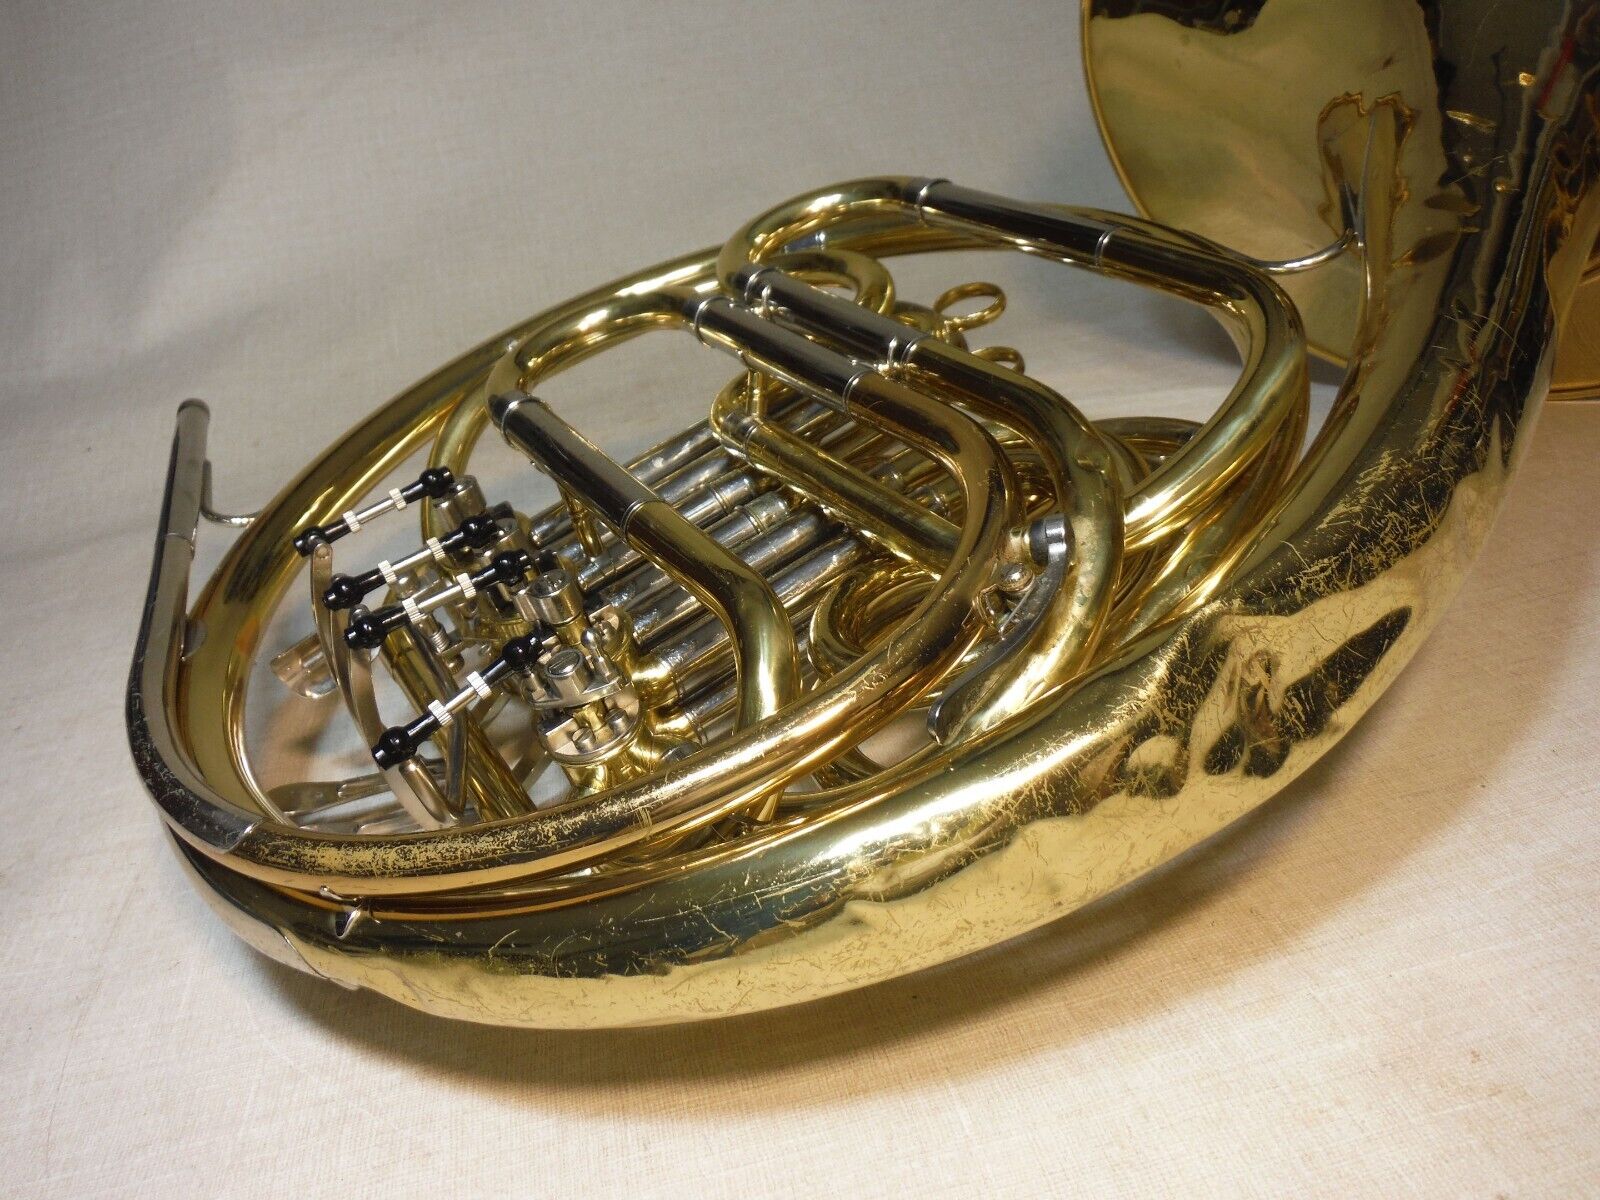 JUPITER JHR-852 DOUBLE FRENCH HORN BRASS WORKING GOOD W/DENTS CASE MOUTHPIECE 9